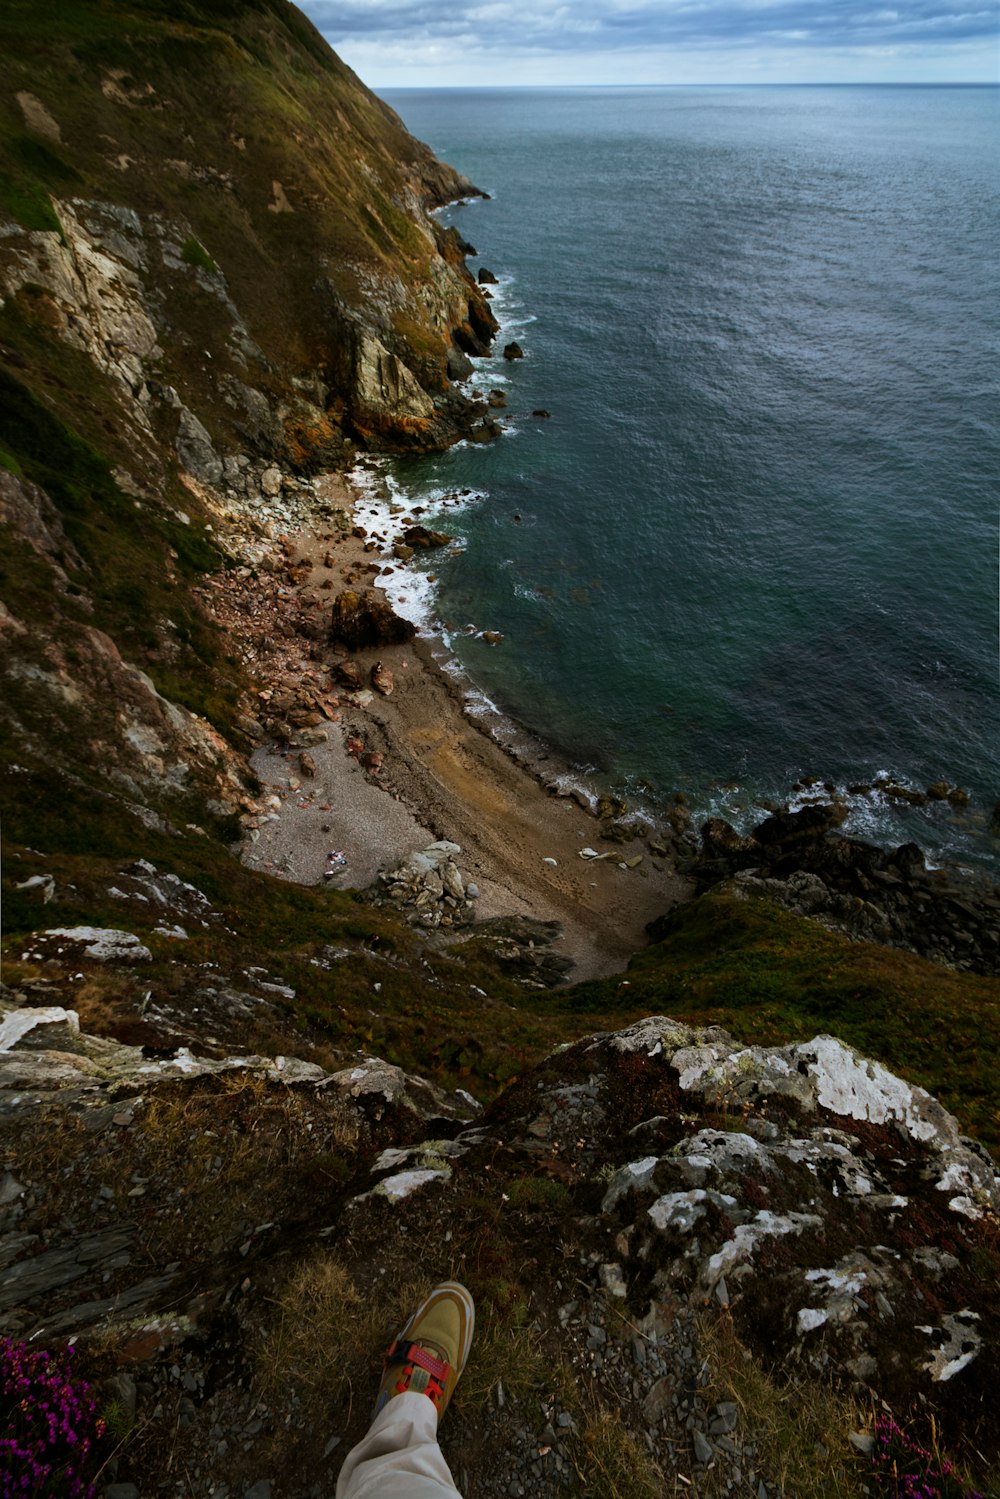 a person's feet on a rocky cliff above a body of water